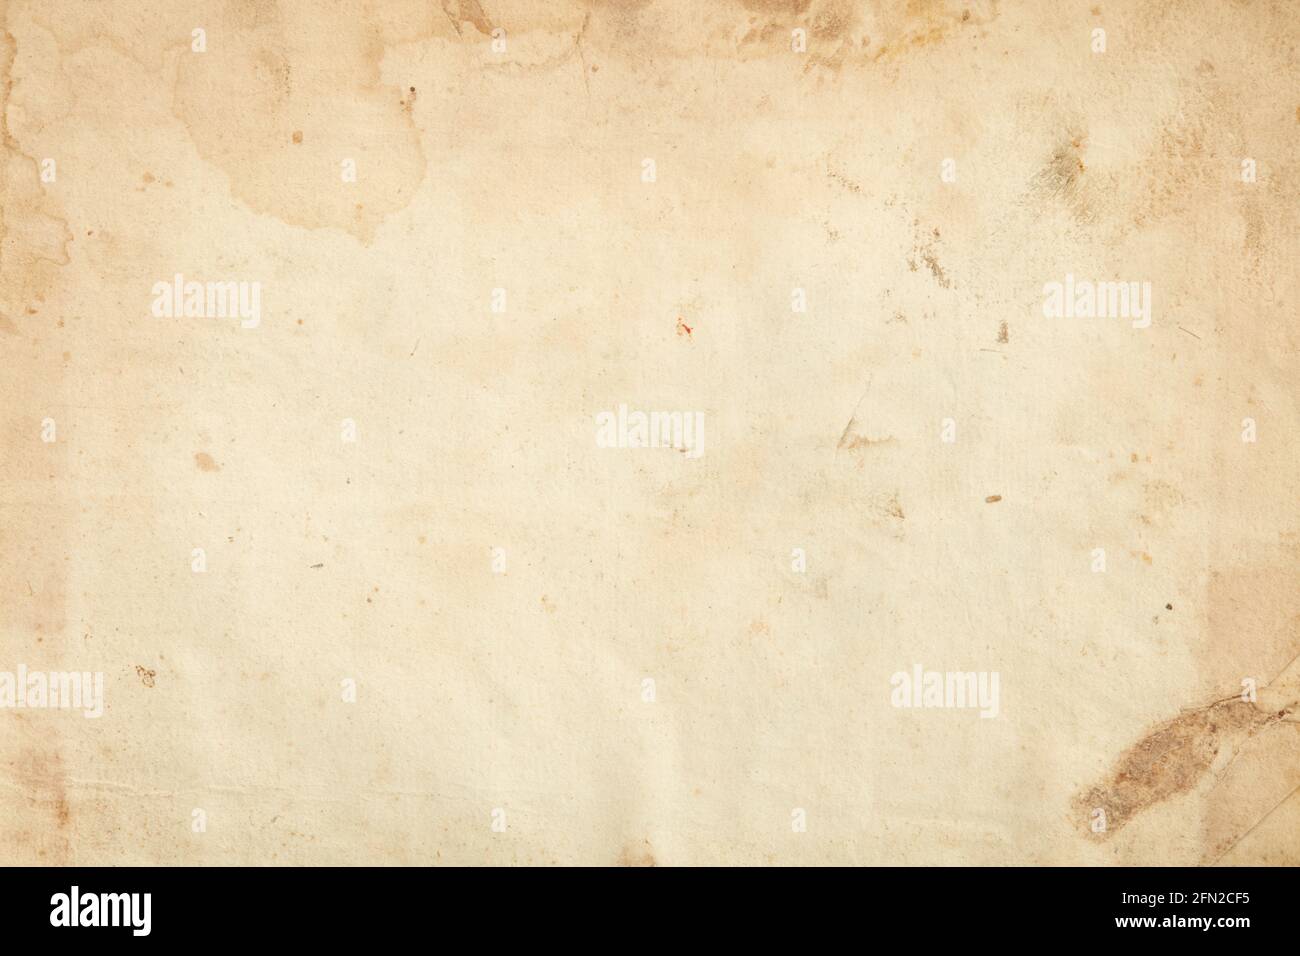 Old paper with stains and humidity signs texture background Stock Photo